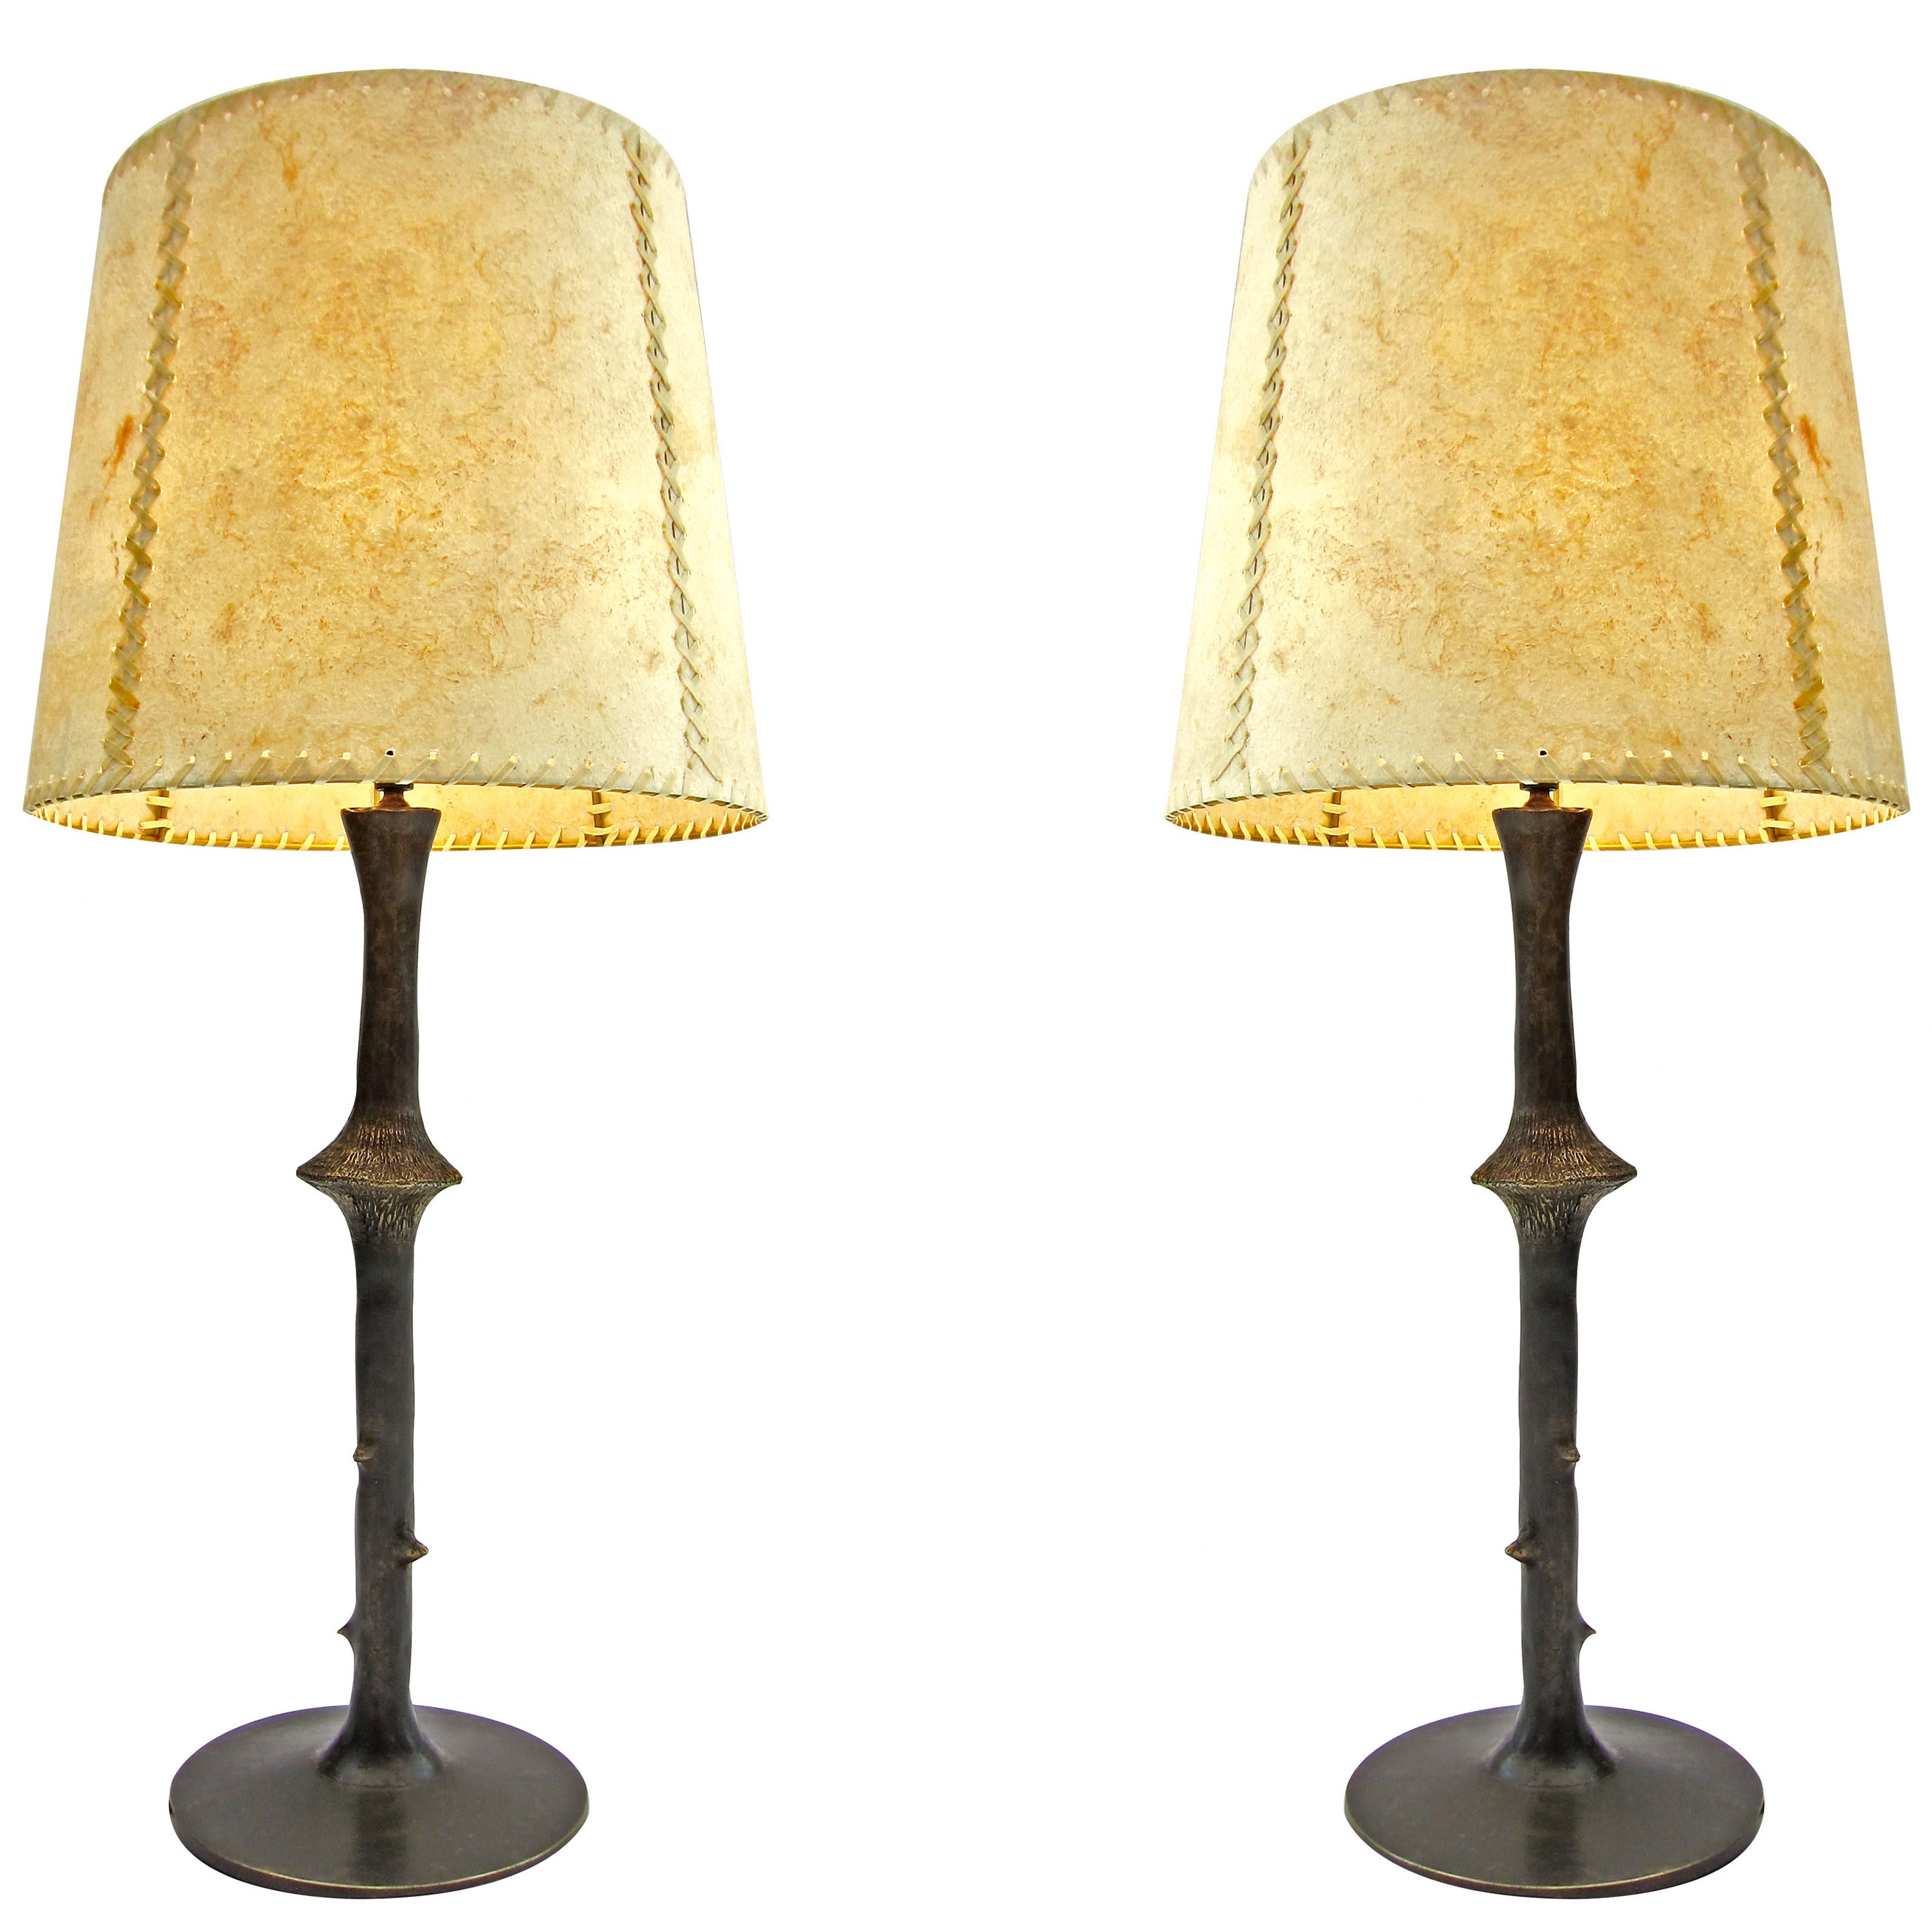 Pair of Bronze 'Espina Bloom' Table Lamps, Edition of 50, Thierry Jeannot, 2015 For Sale